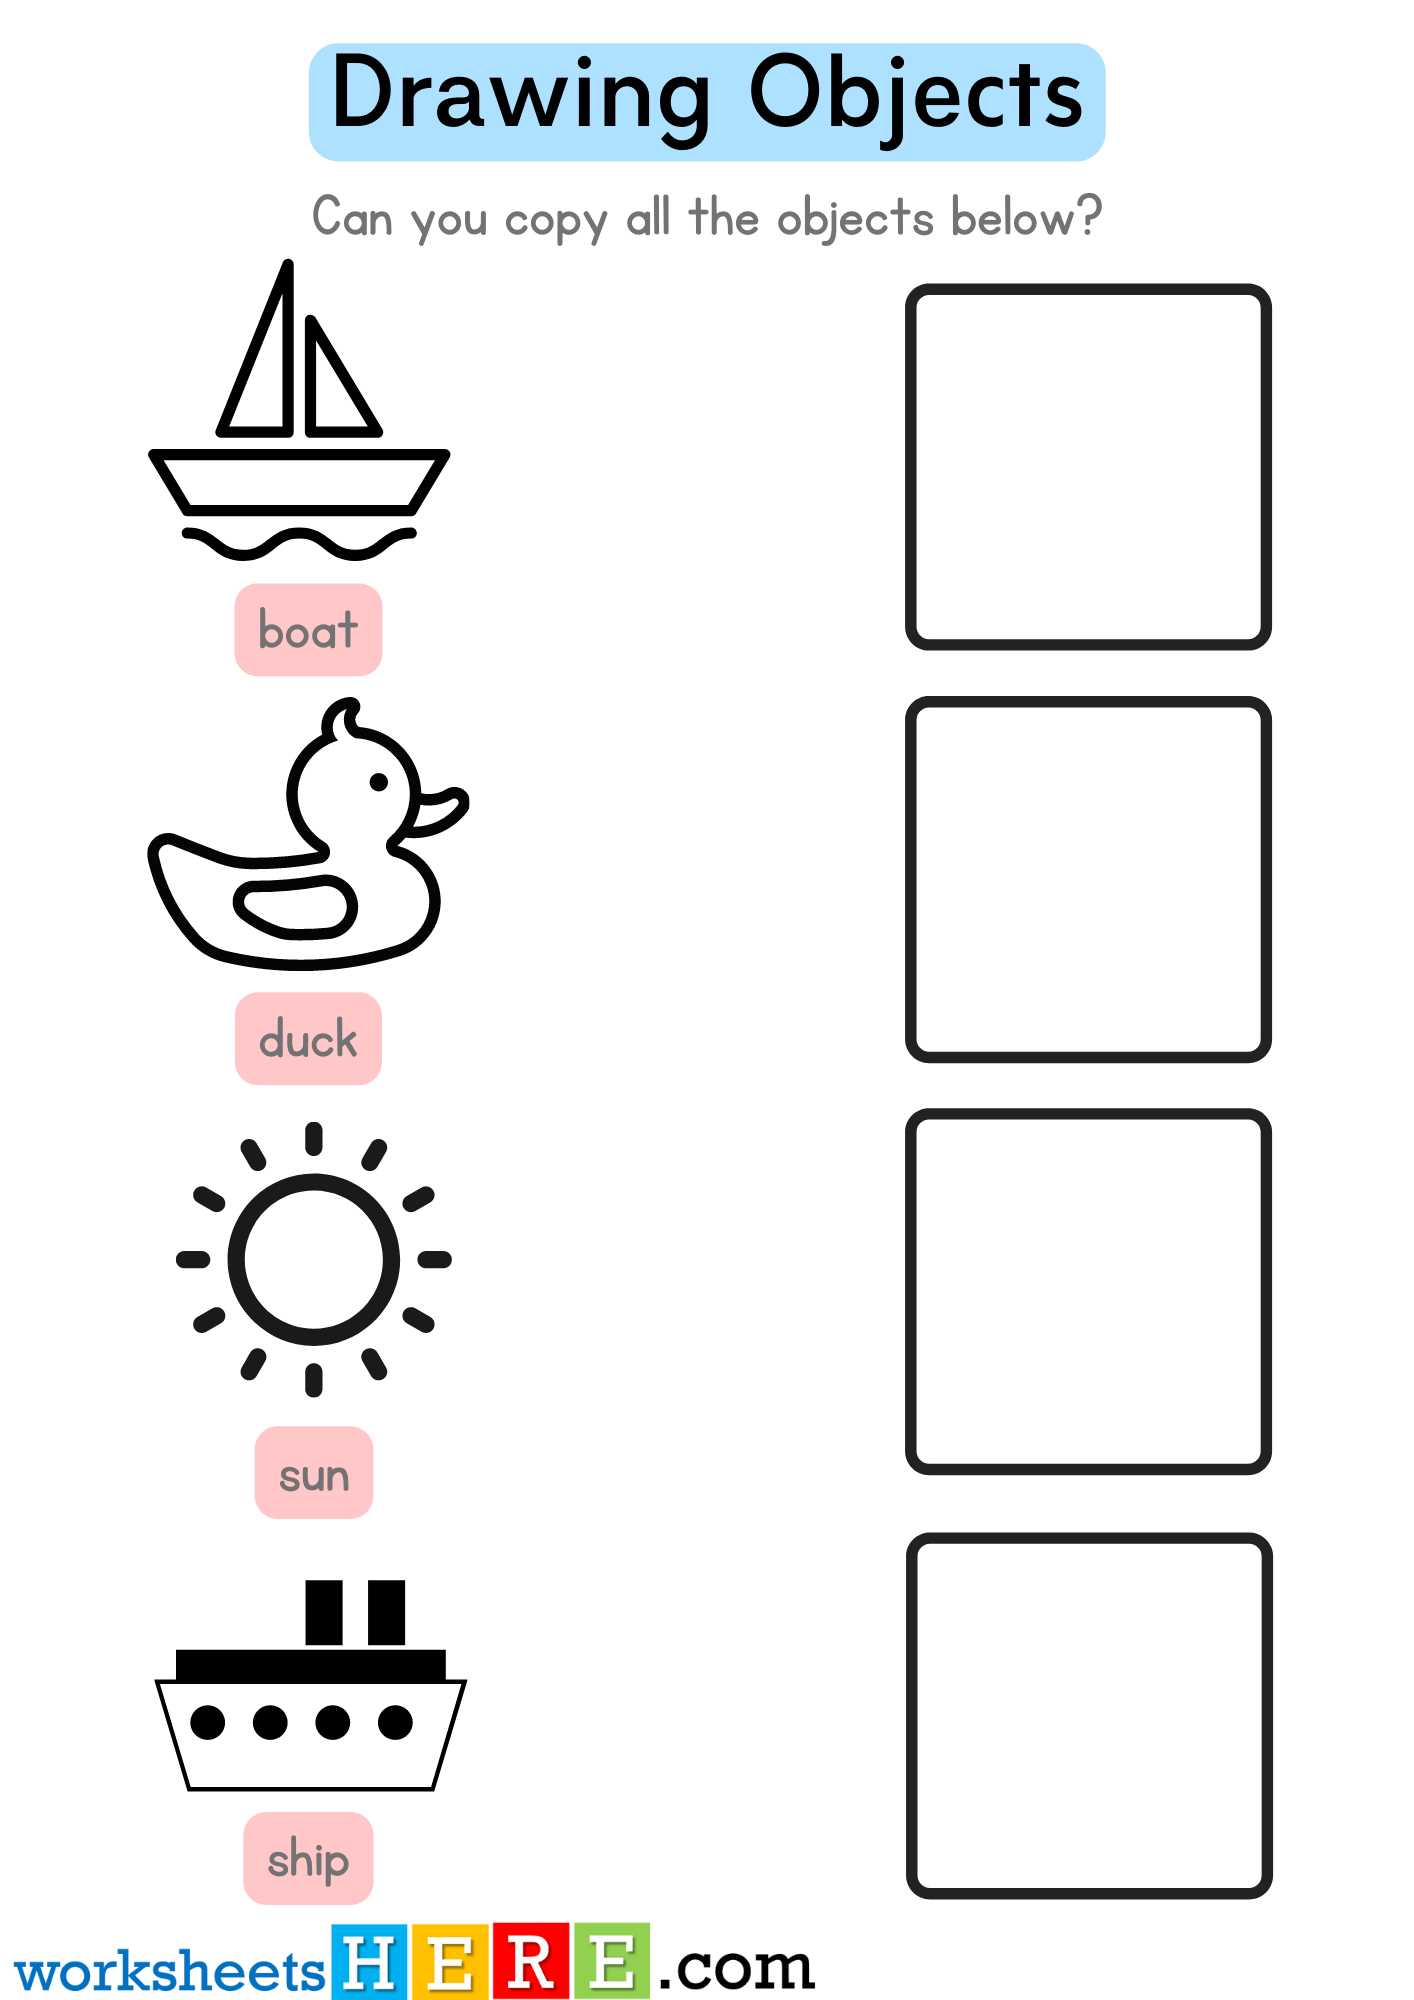 Copy All the Objects Below, Drawing Boat Duck Sun Ship Examples Worksheet For Kindergarten